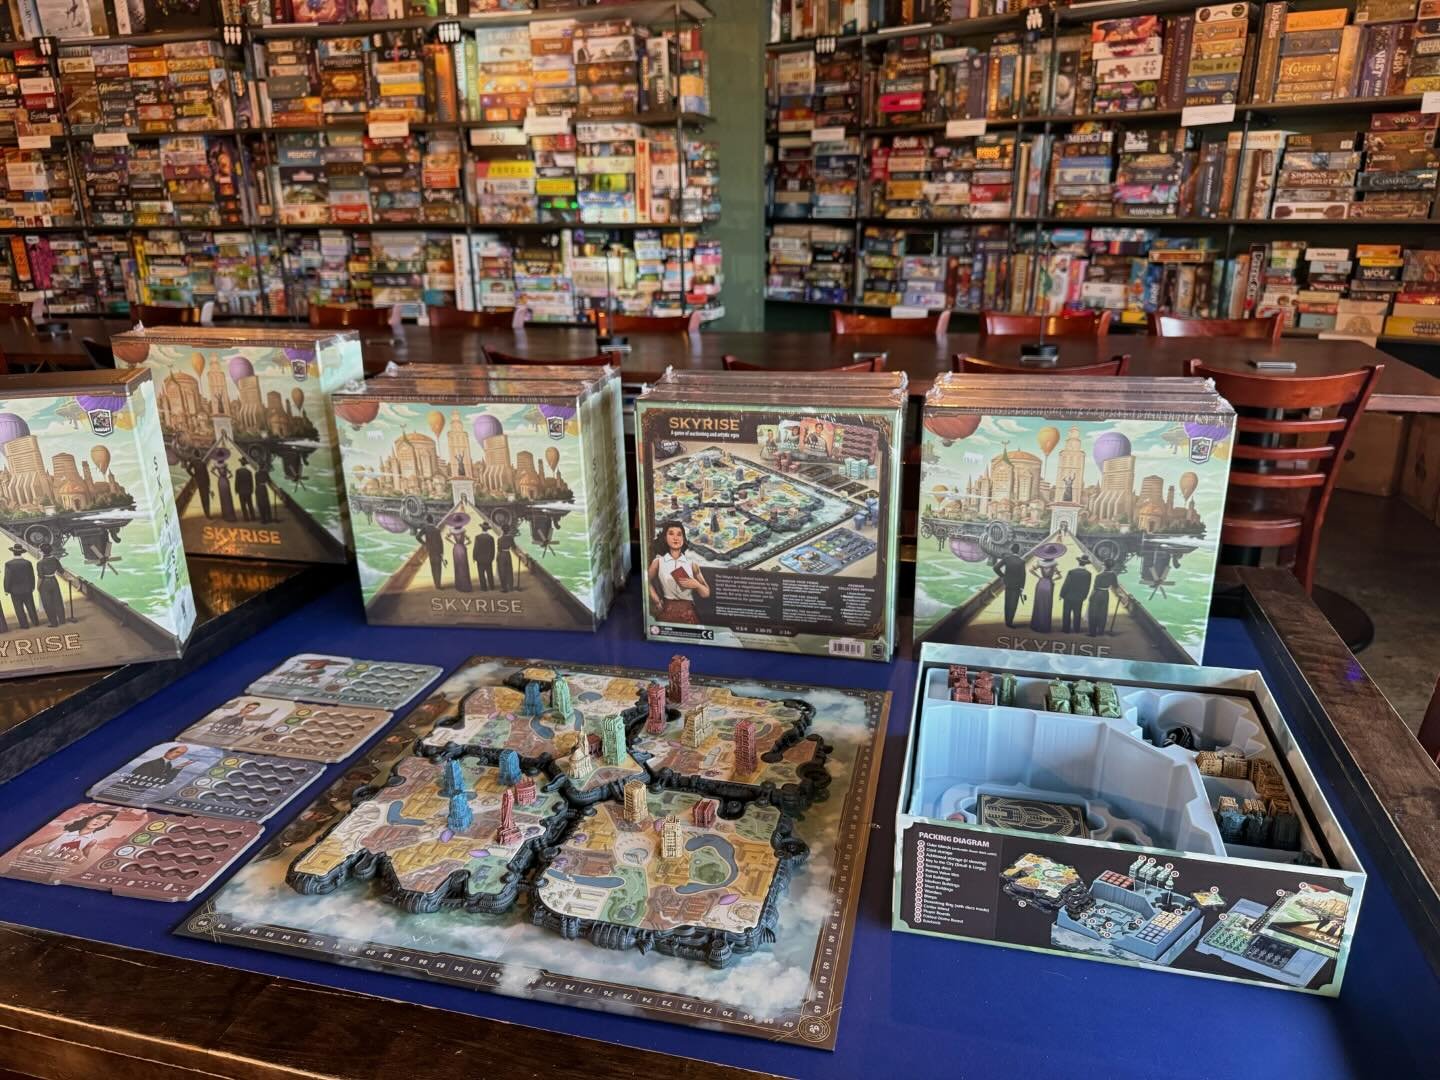 Skyrise is here!

We have seven copies of the premium collector version (prewashed buildings!) for $140+tax. This gorgeous game from @roxleygames has players auctioning building sites and gathering favor, scoring both hidden and public objectives. We